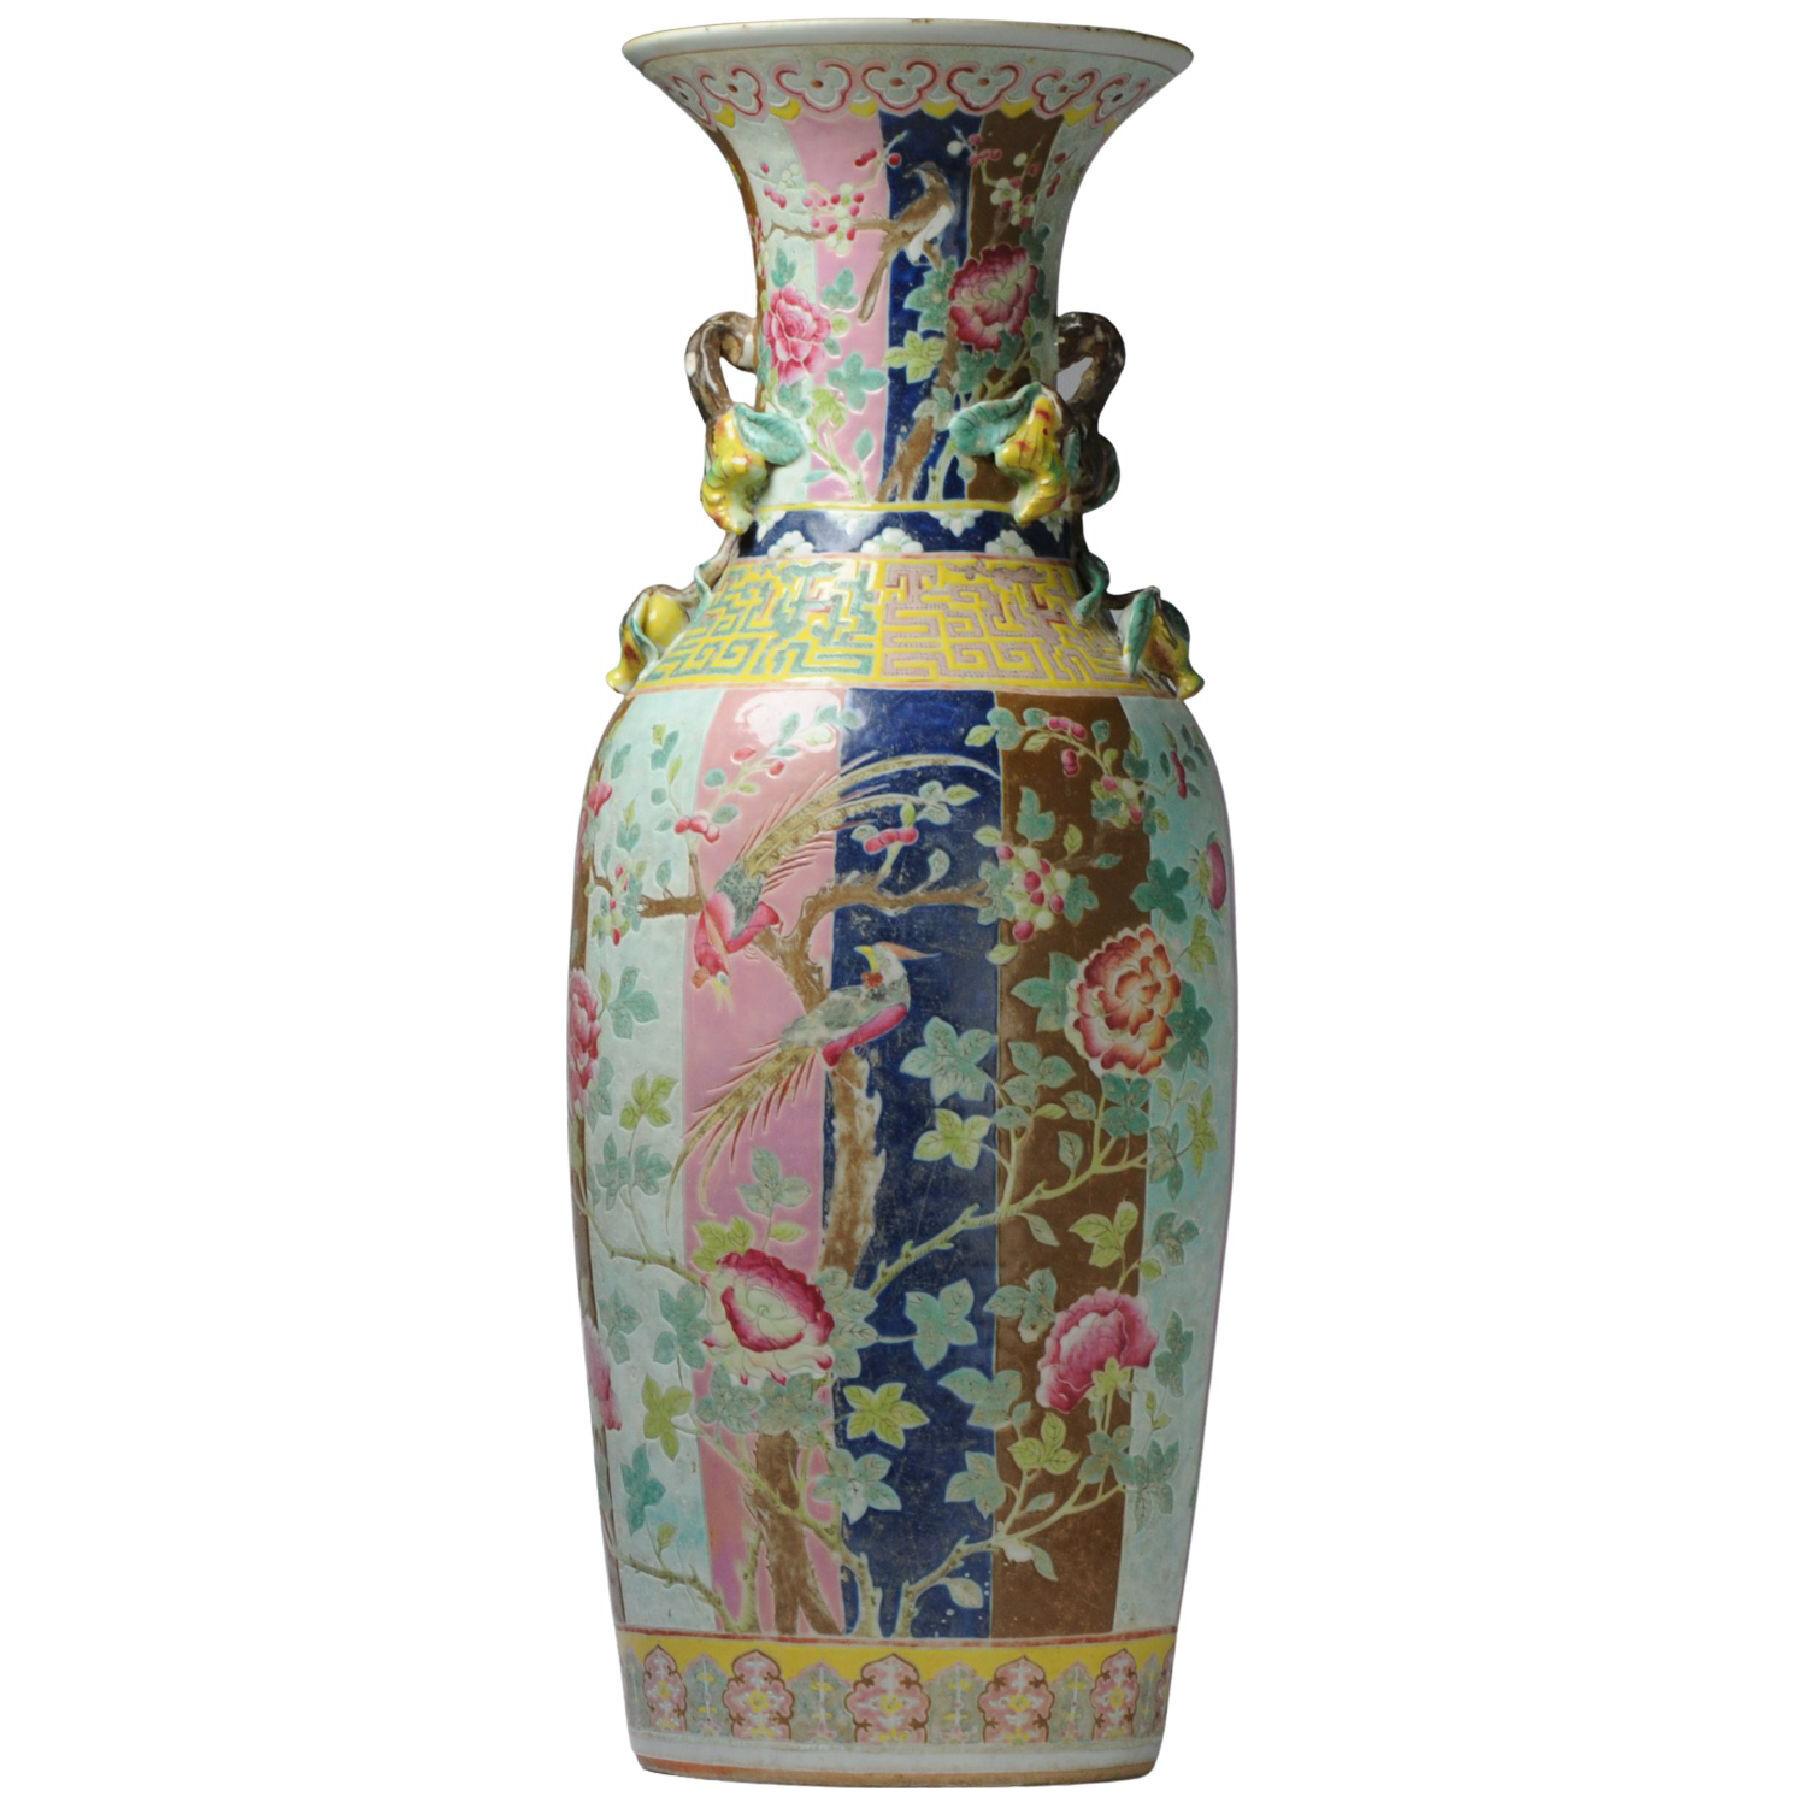 Large 61cm Antique Vase Chinese Porcelain Qing period Polychrome Southeast Asia